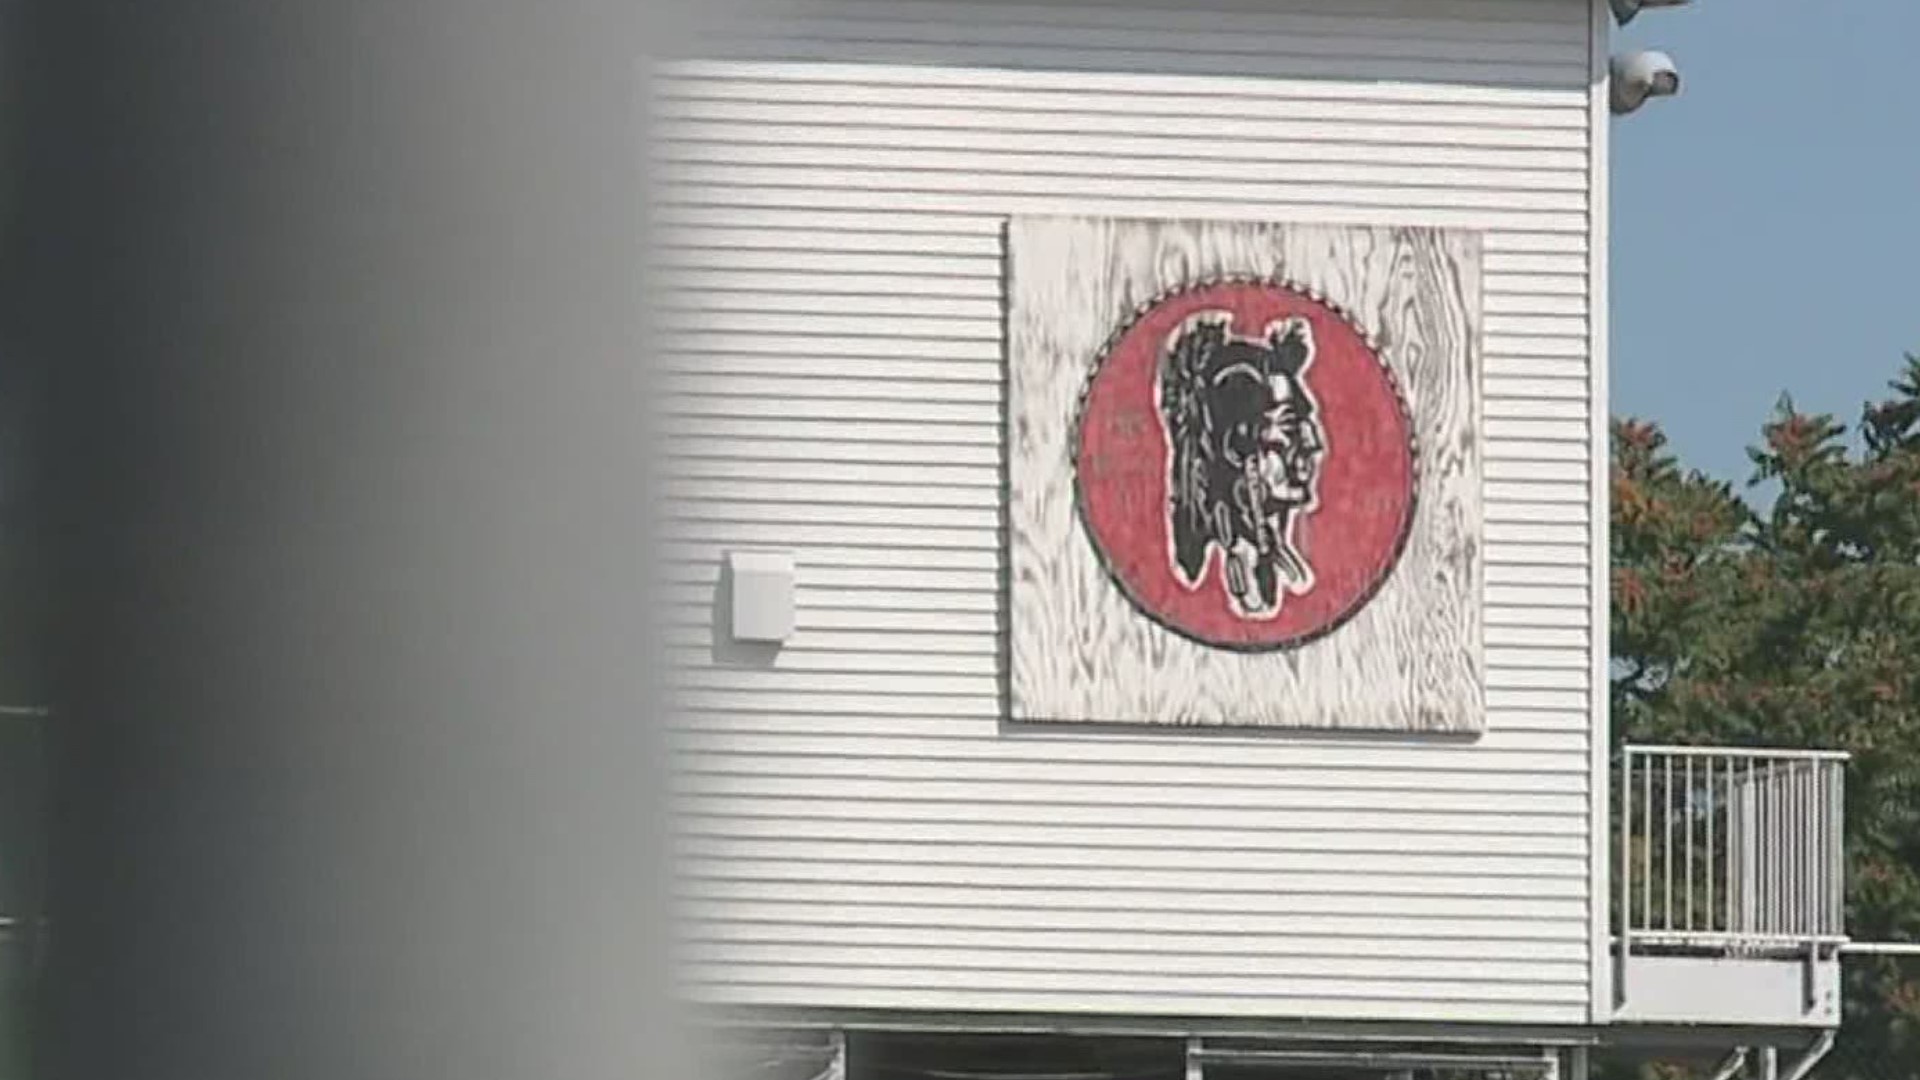 The Susquehanna Township School District "declined to support a motion to change the district’s imagery and logo" in a 5-4 vote Tuesday night.